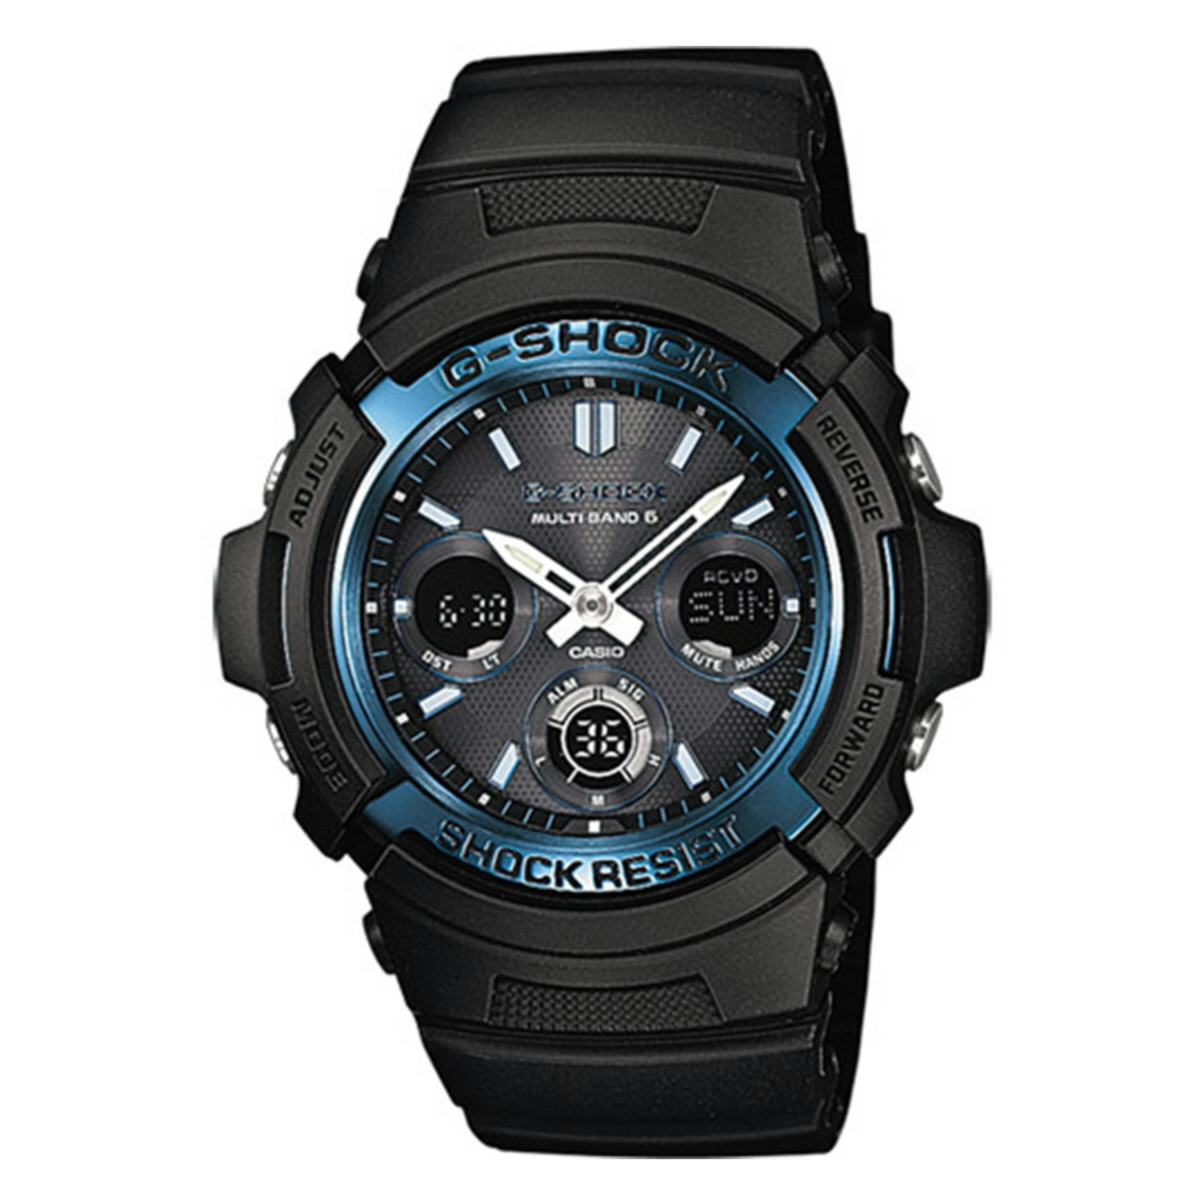 CLASSIC STYLE CASIO G-SHOCK  AWG-M100A-1AER